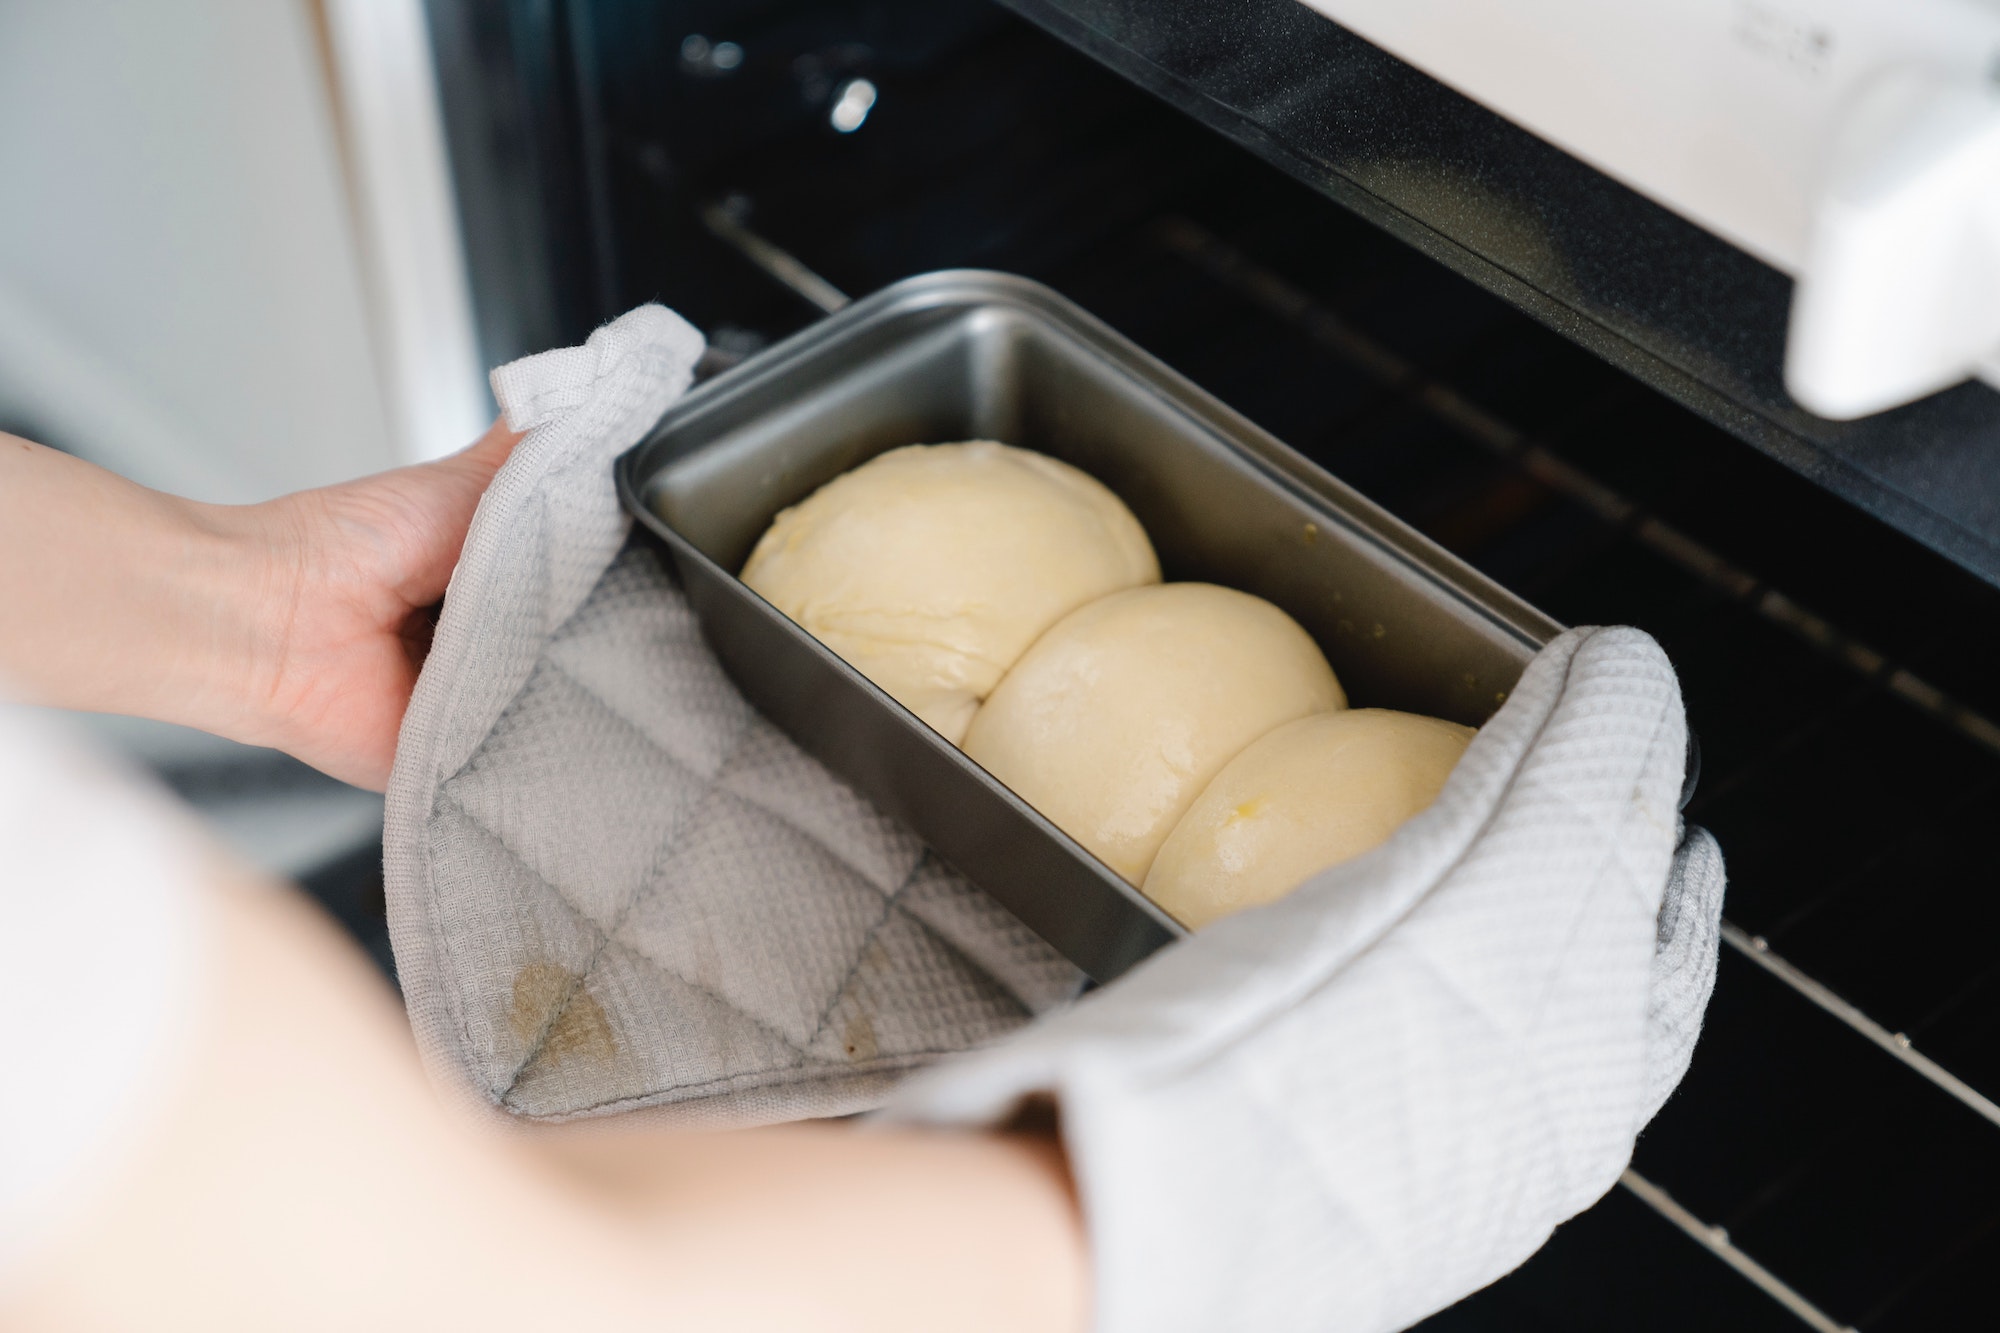 Best Oven Mitts